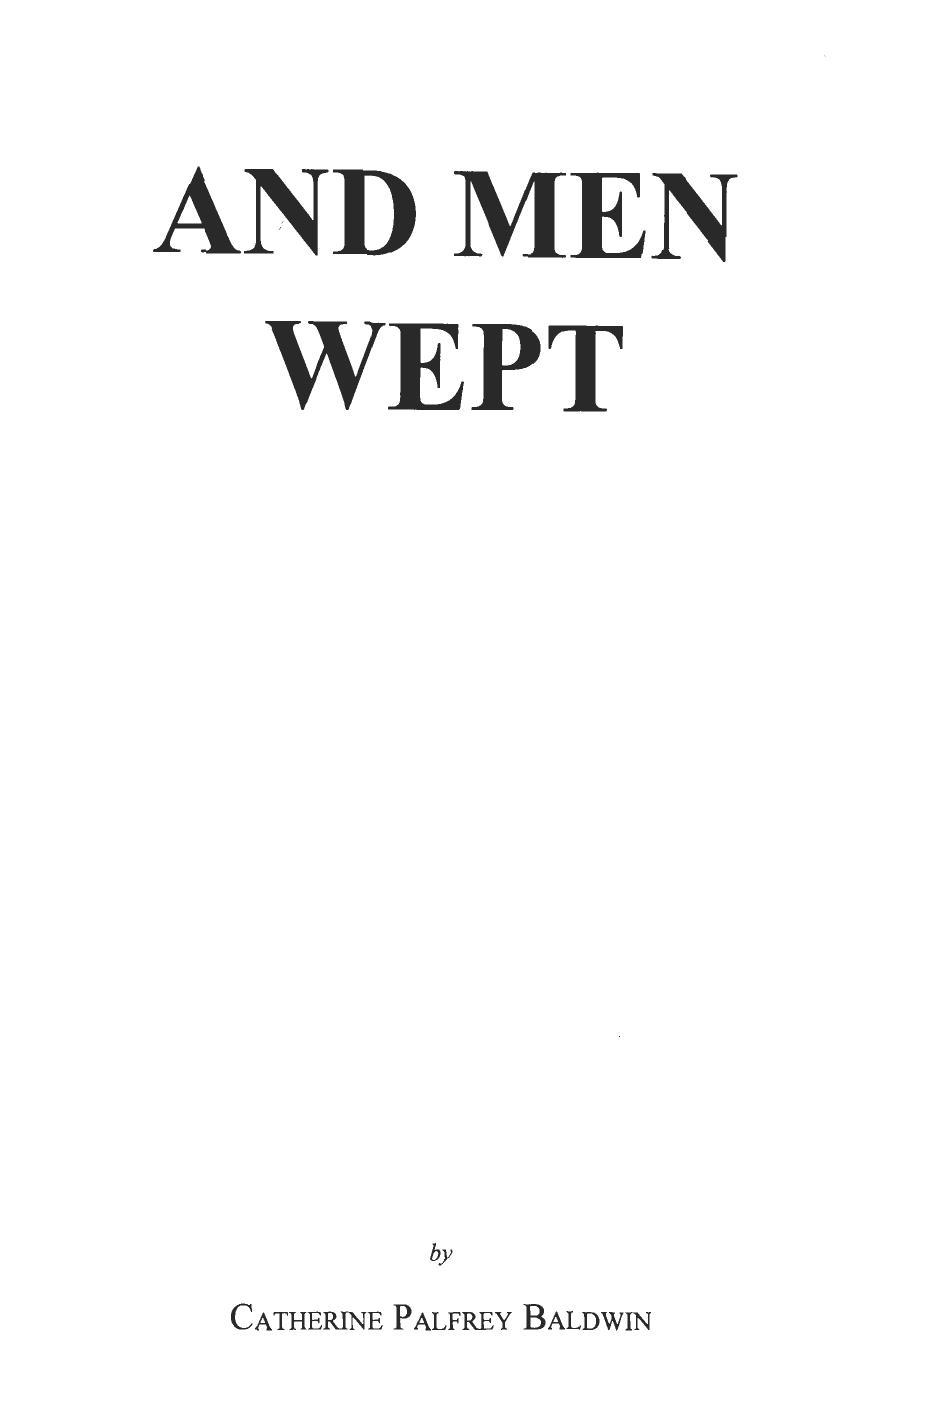 And Men Wept (1954) by Catherine Palfrey Baldwin